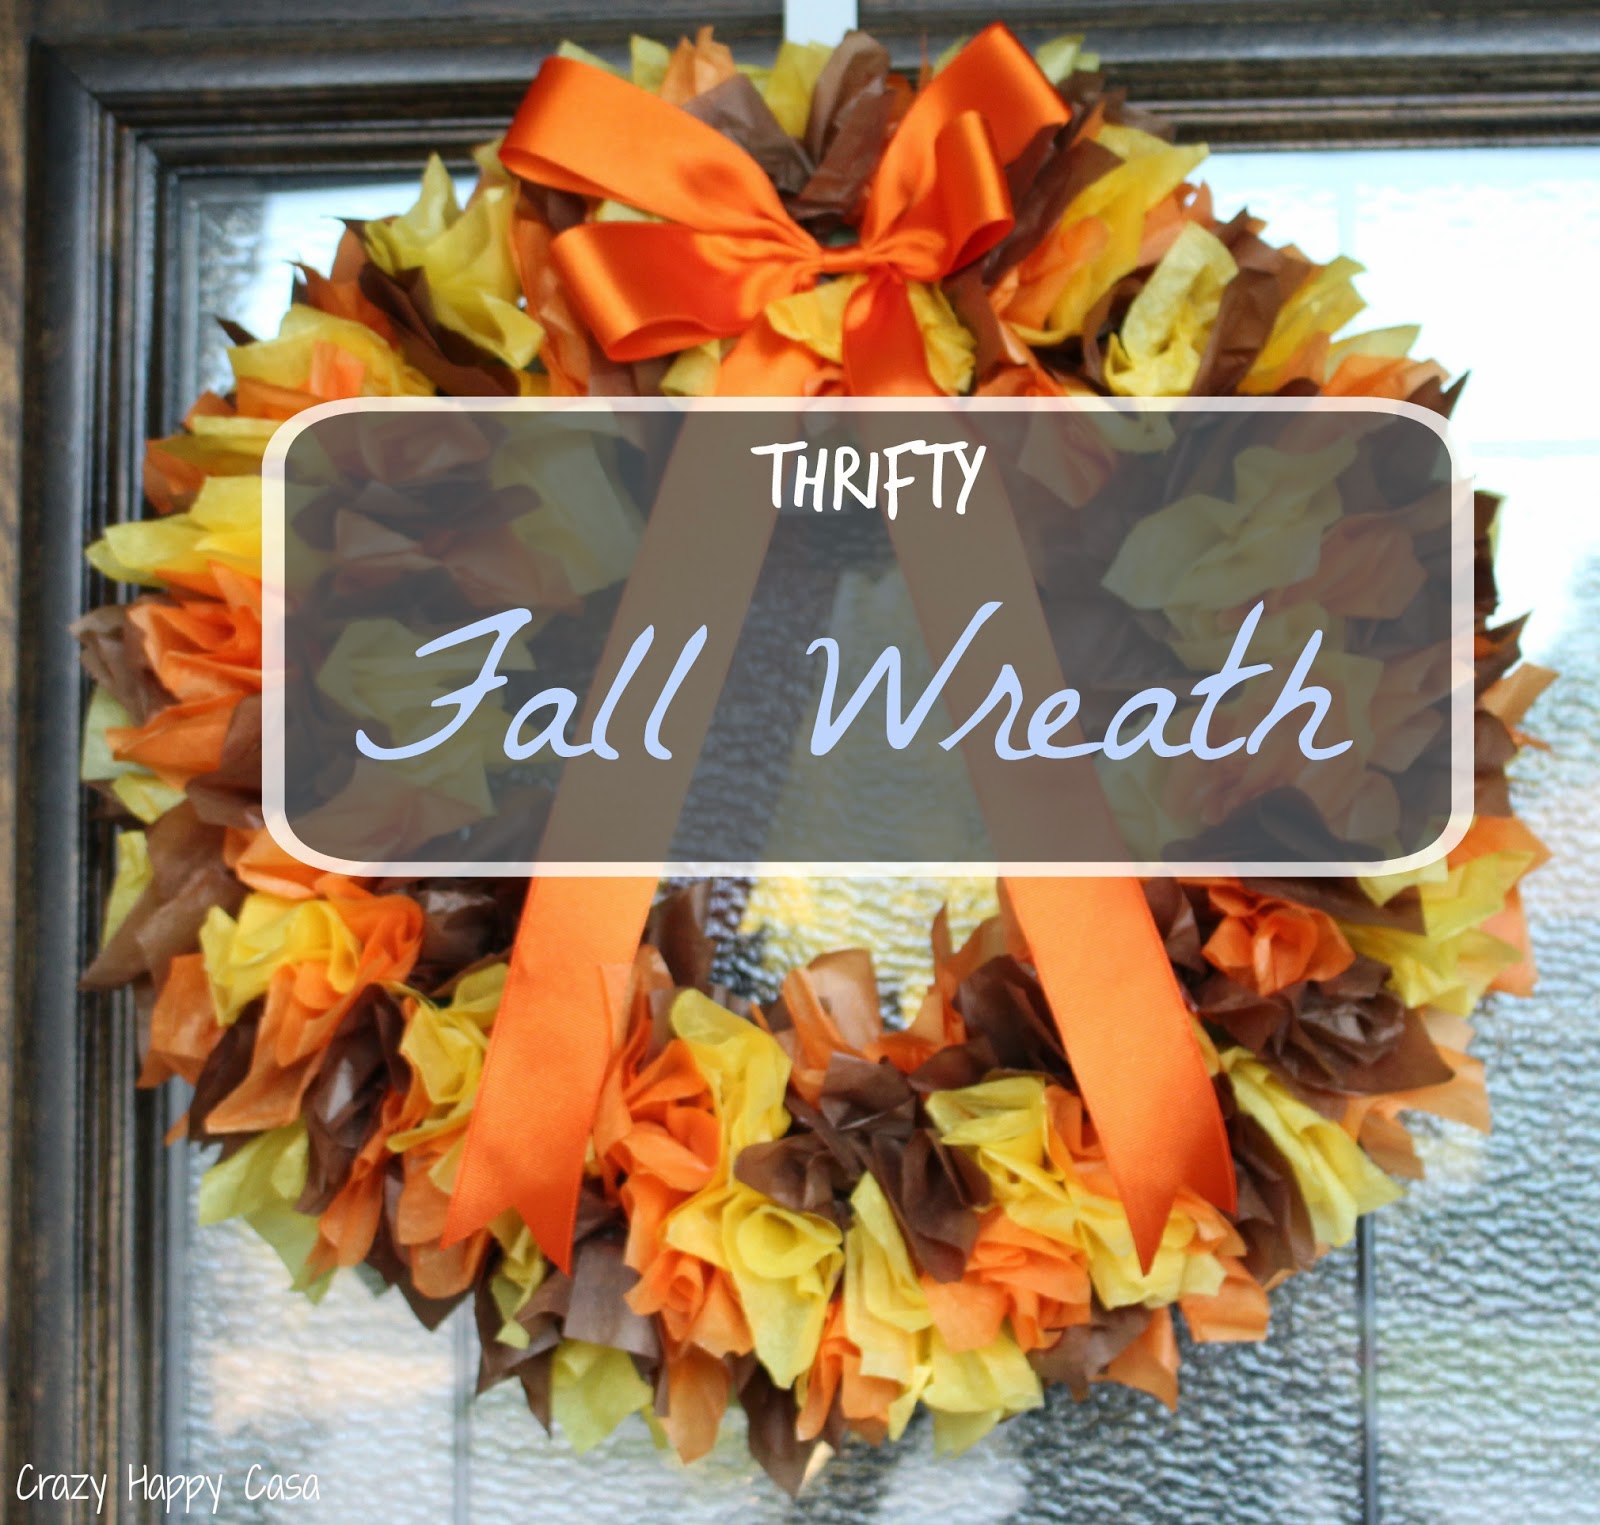 Crazy Happy Casa: The Fall Keeps Coming: Fall Wreath Tutorial